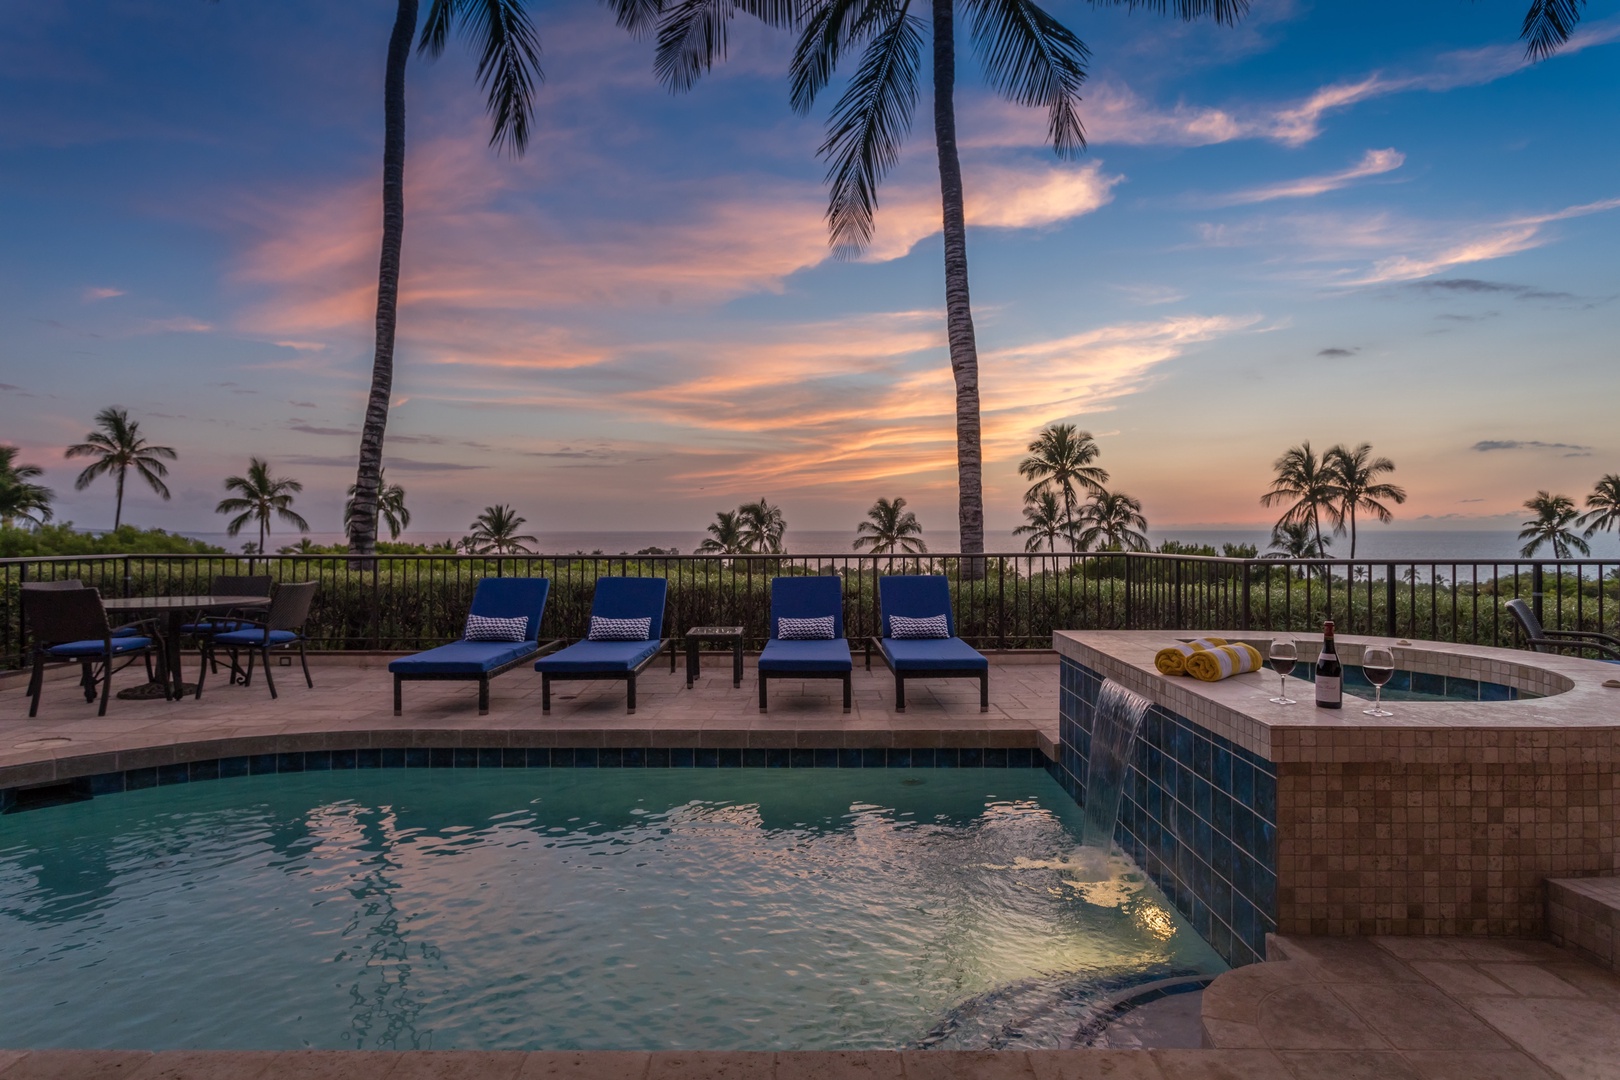 Kamuela Vacation Rentals, 3BD Villas (39) at Mauna Kea Resort - Tropical sunsets from your own slice of paradise.